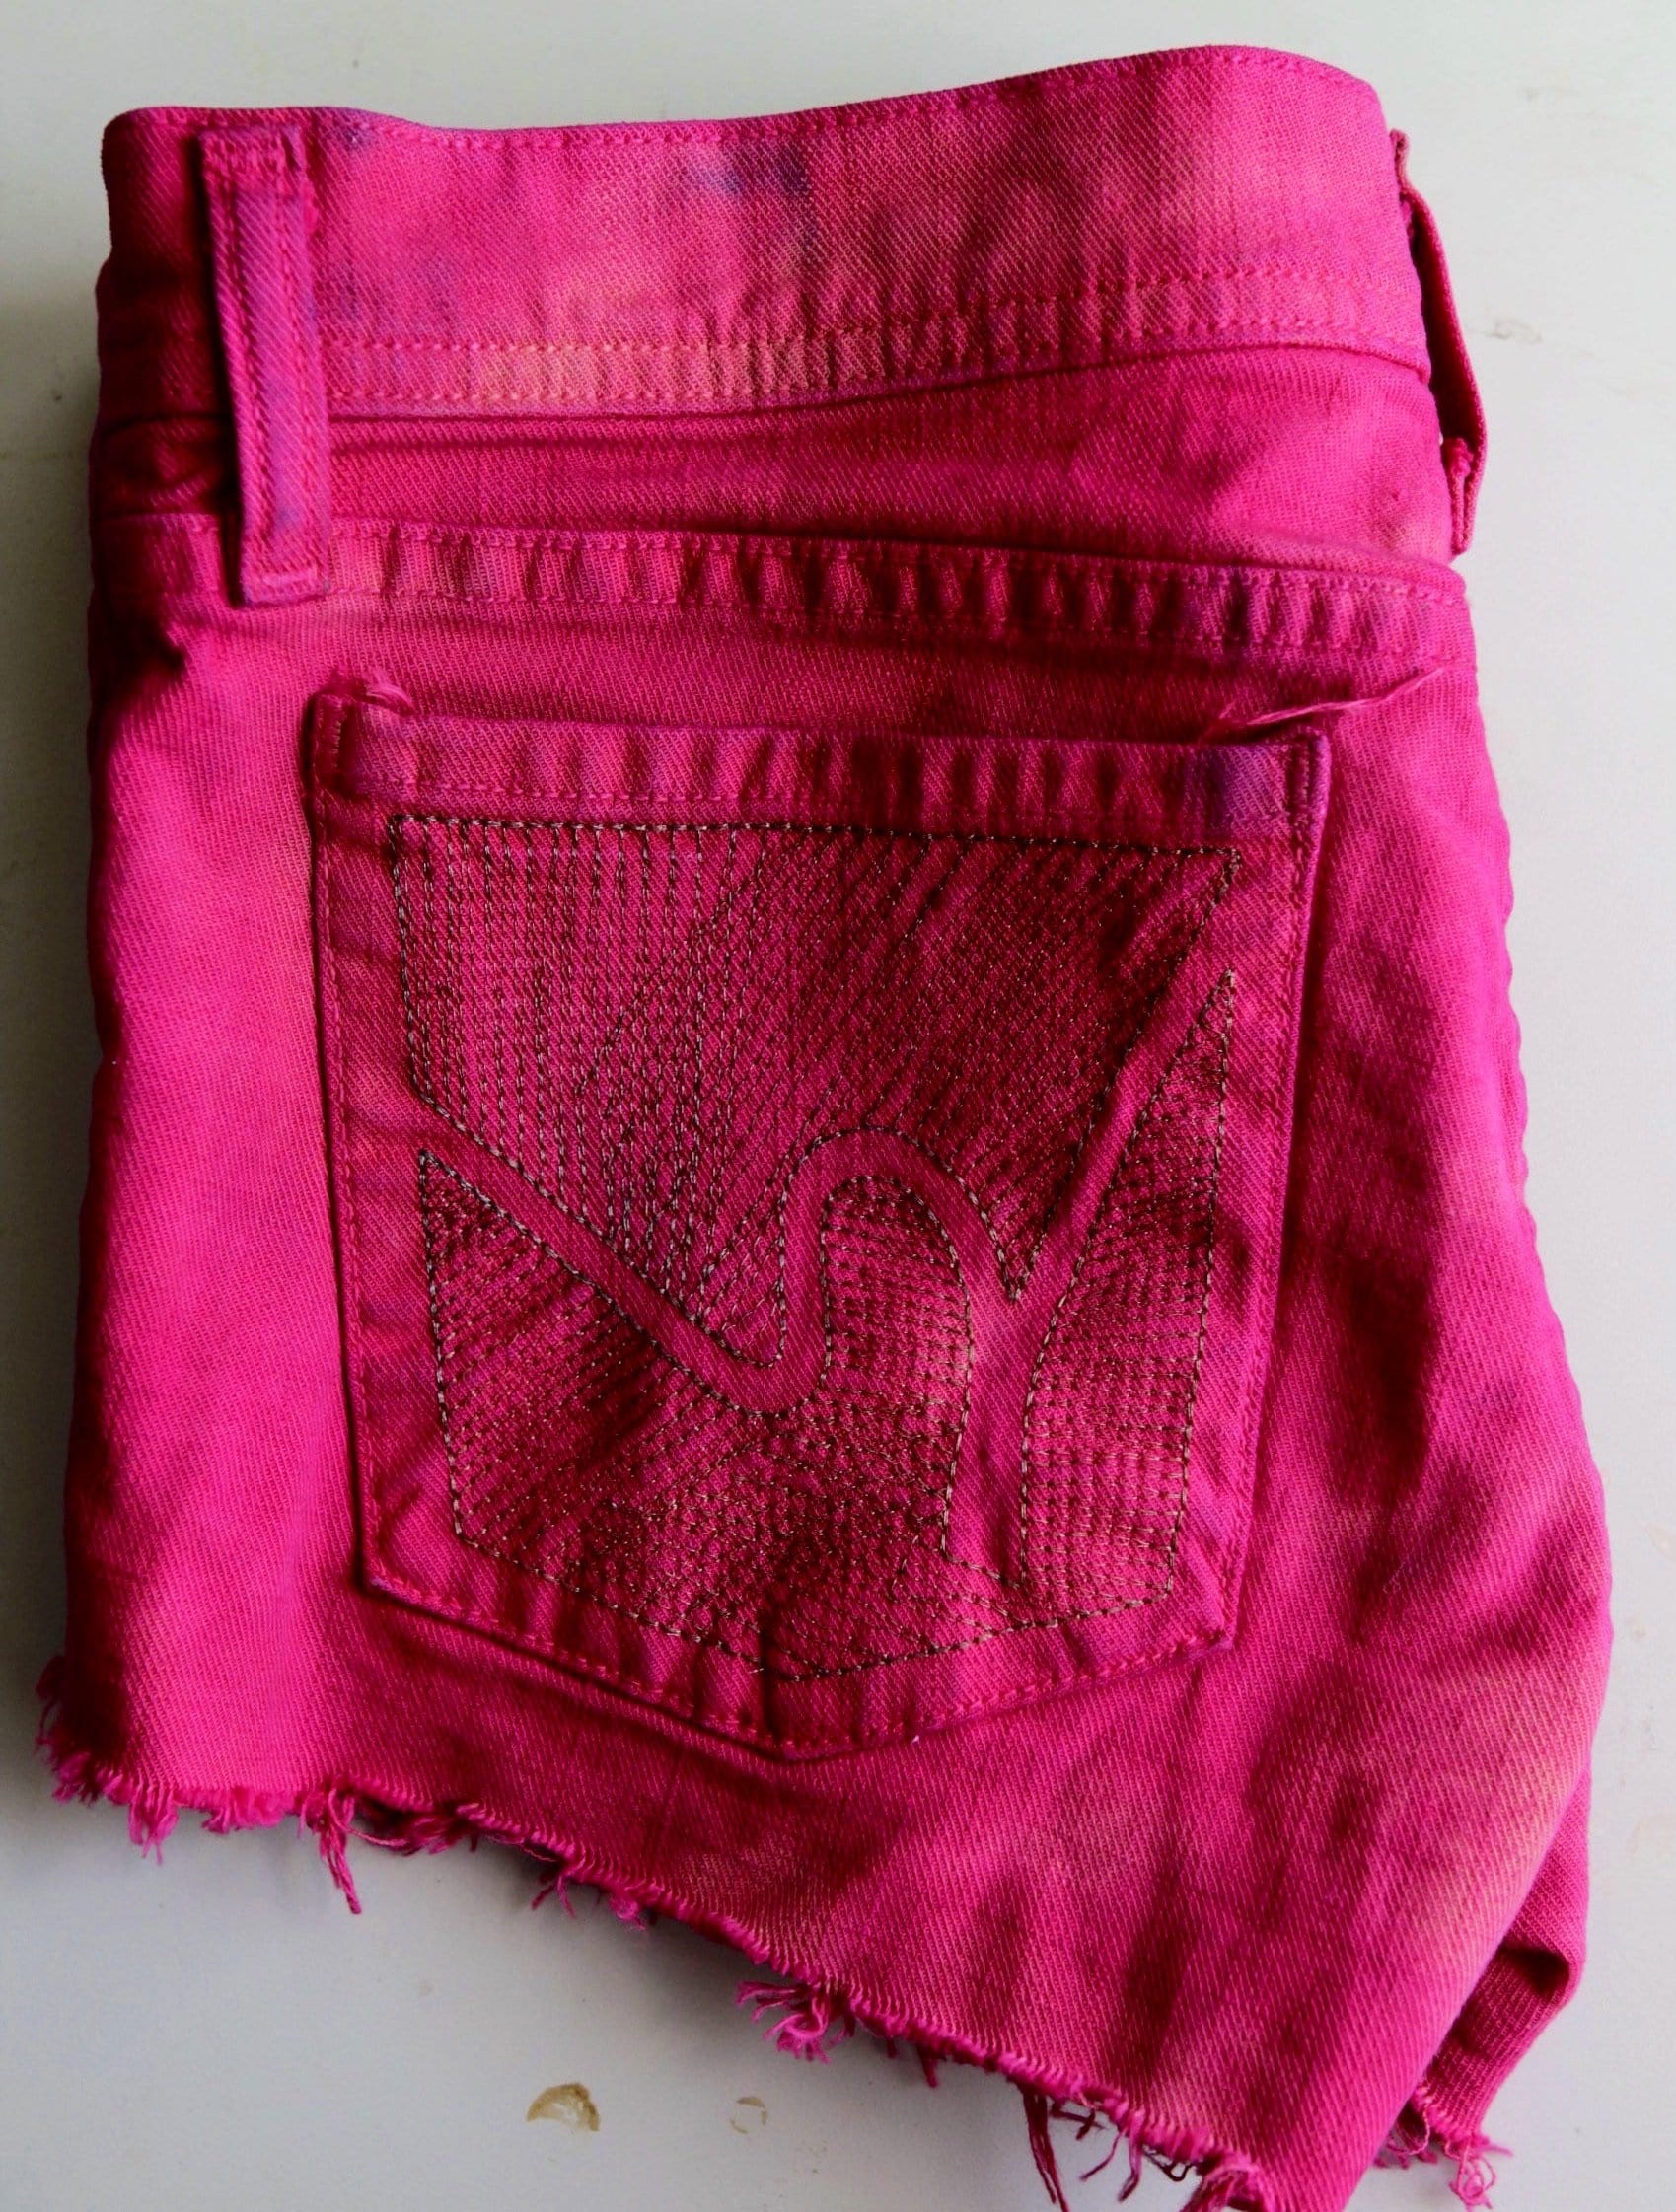 Citizens for humanity upcycled red cut-off denim shorts